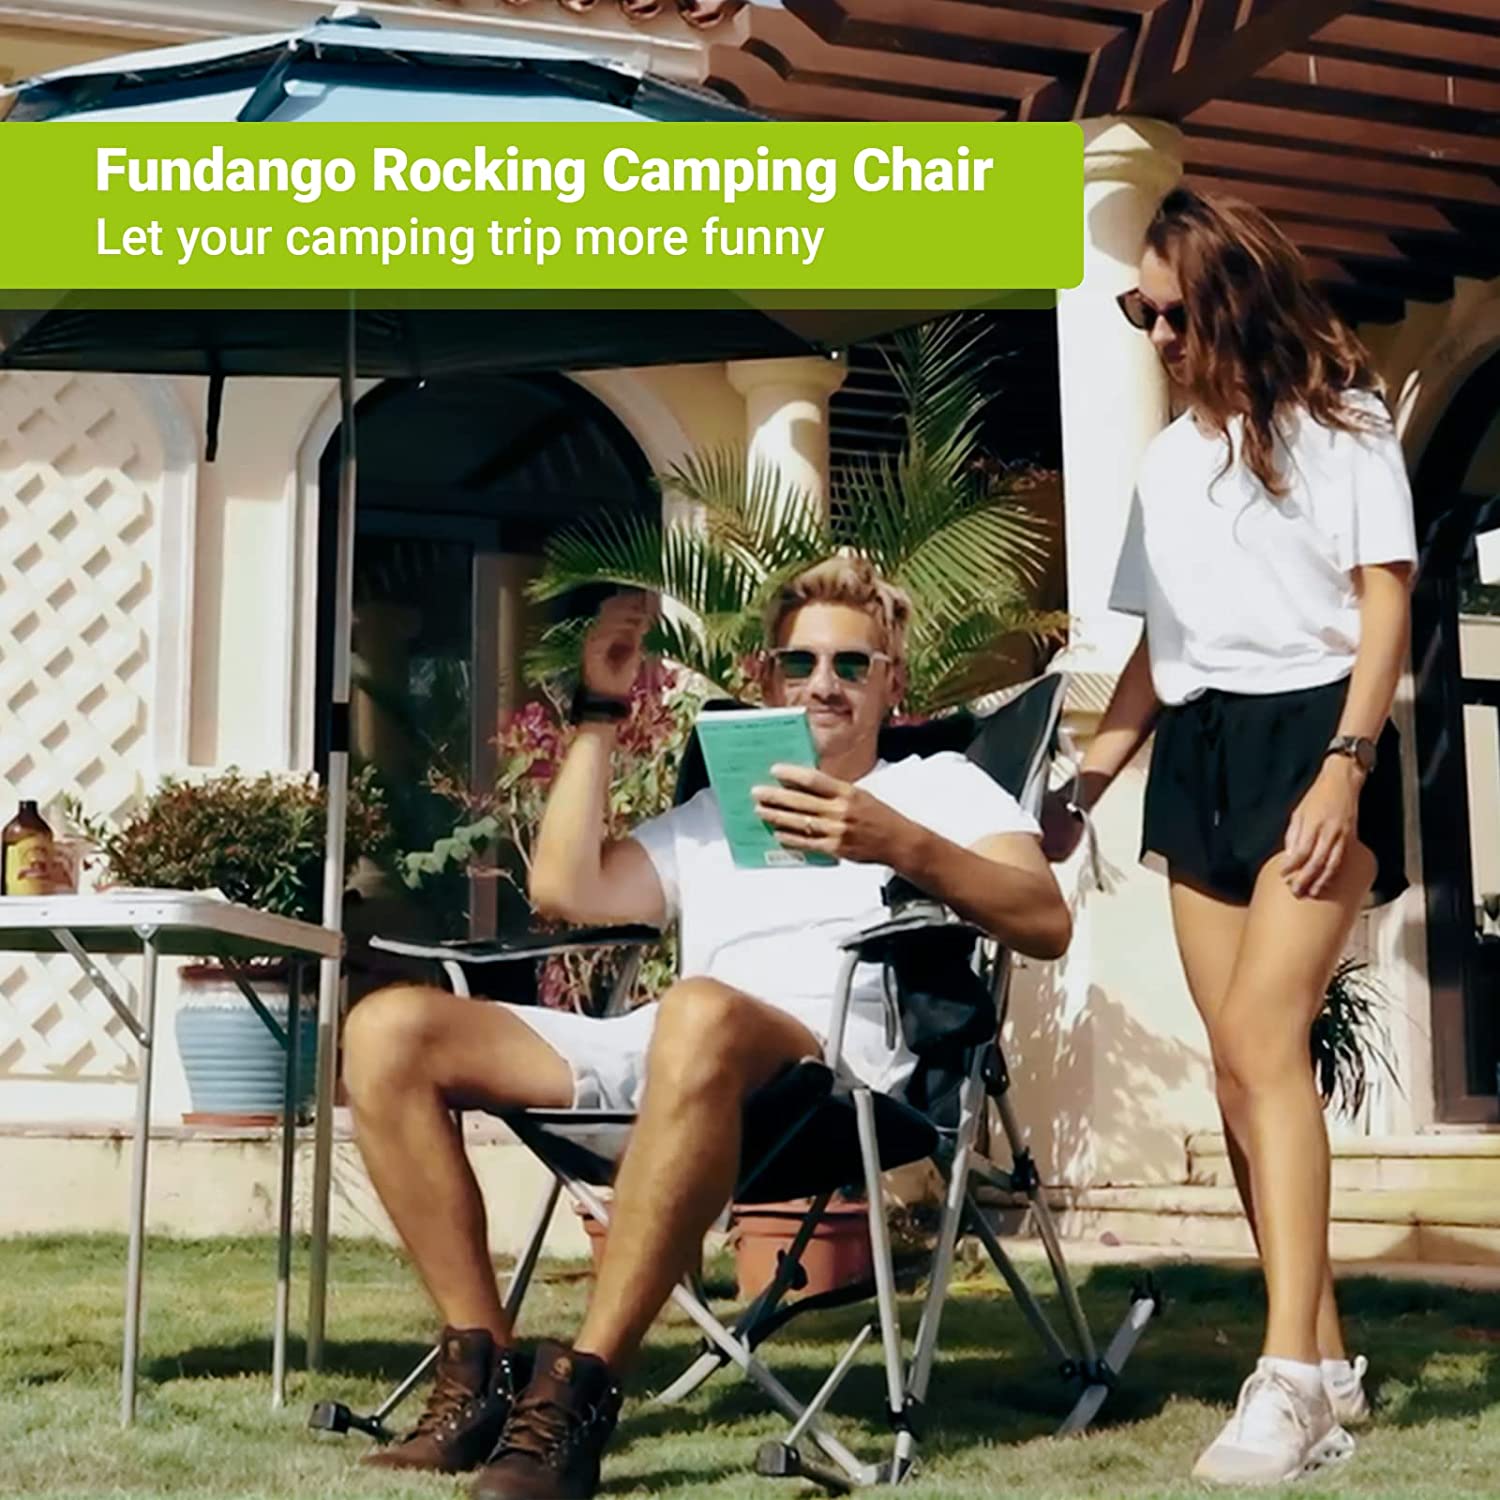 FUNDANGO 2 Pack Camping Rocking Chairs Folding Swing Chair Lounger with Headrest for Adult Support 220lbs Black - image 5 of 6